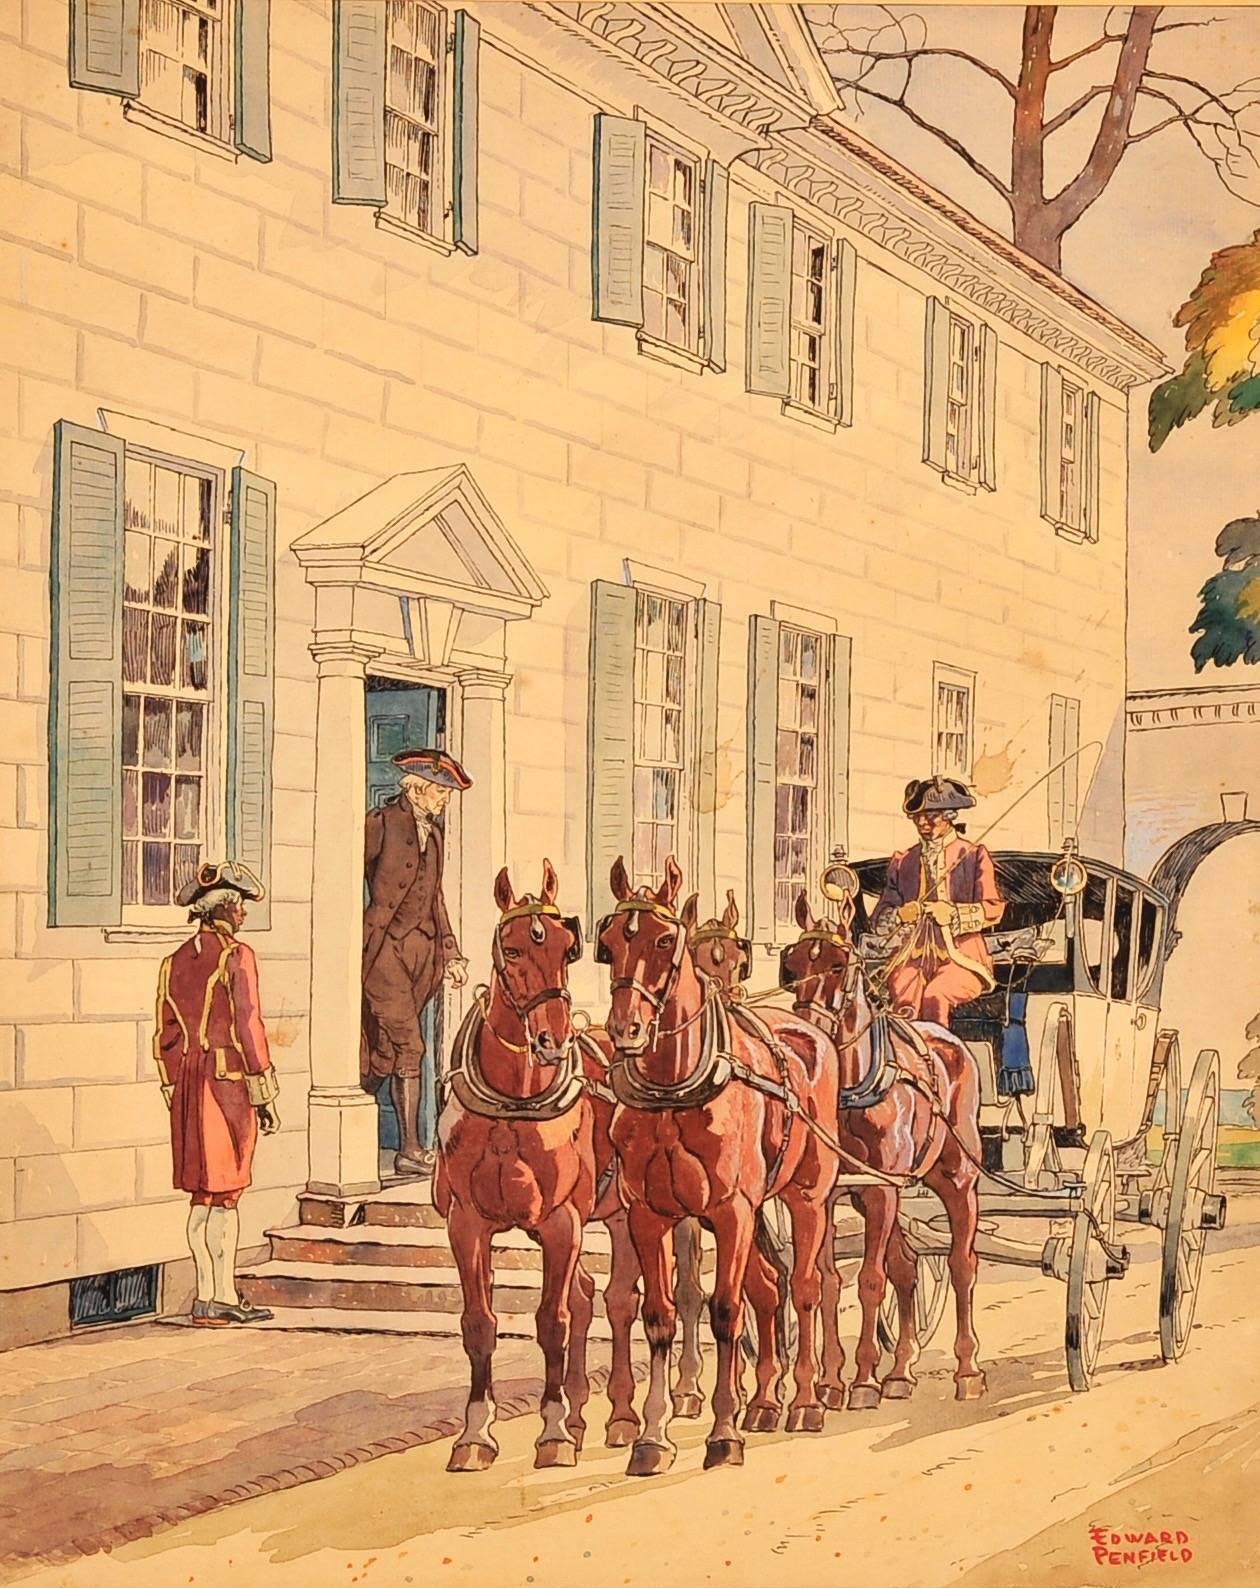 Washington at Mount Vernon - Painting by Edward Penfield